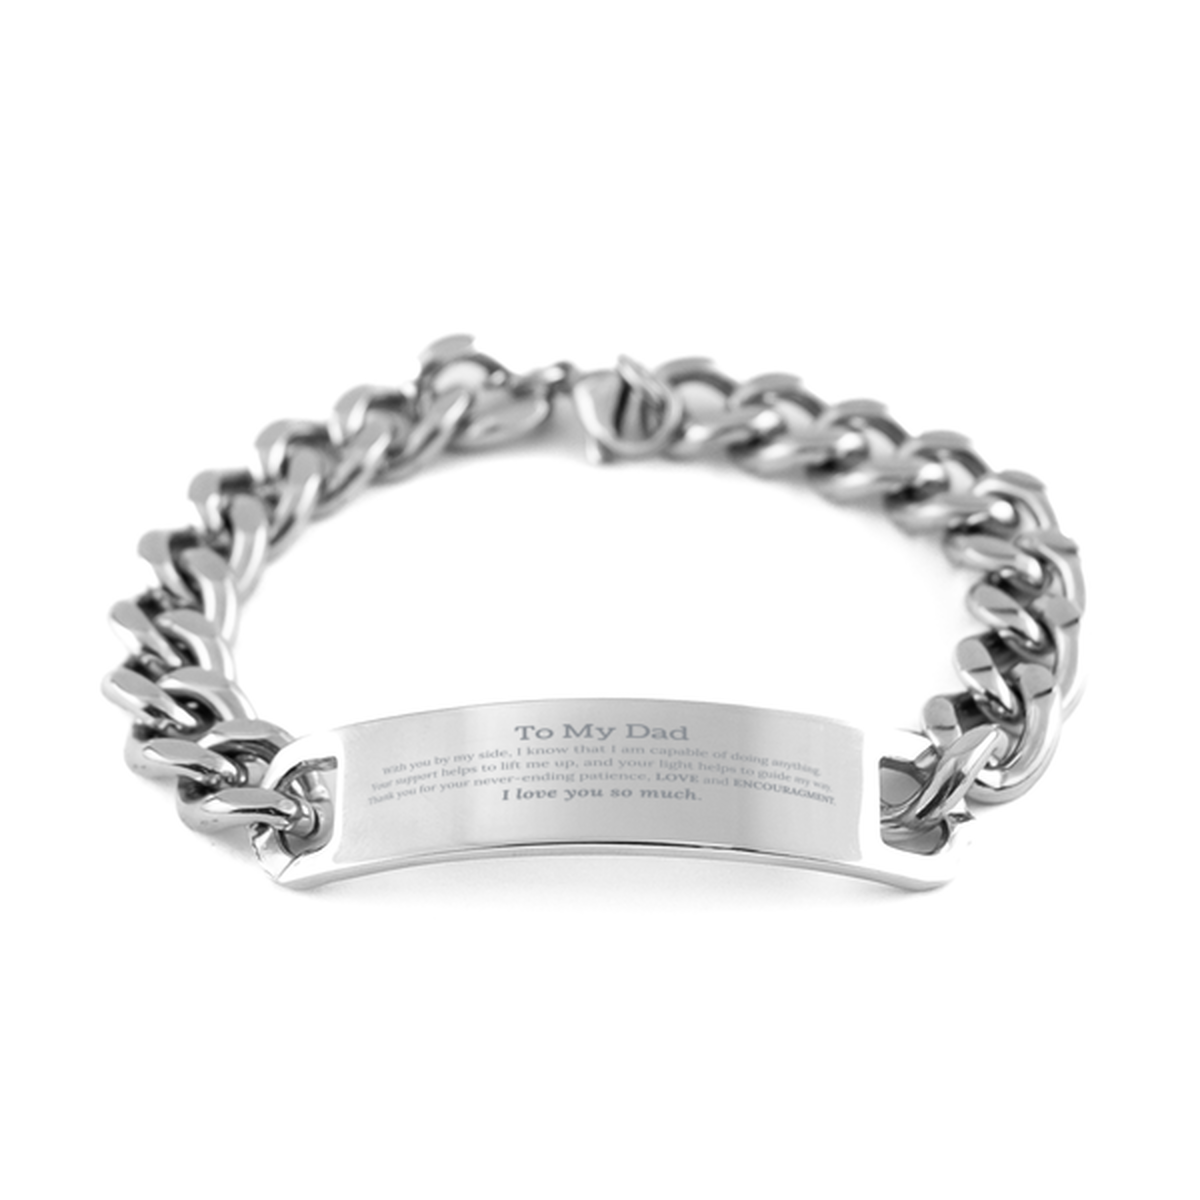 Appreciation Dad Cuban Chain Stainless Steel Bracelet Gifts, To My Dad Birthday Christmas Wedding Keepsake Gifts for Dad With you by my side, I know that I am capable of doing anything. I love you so much